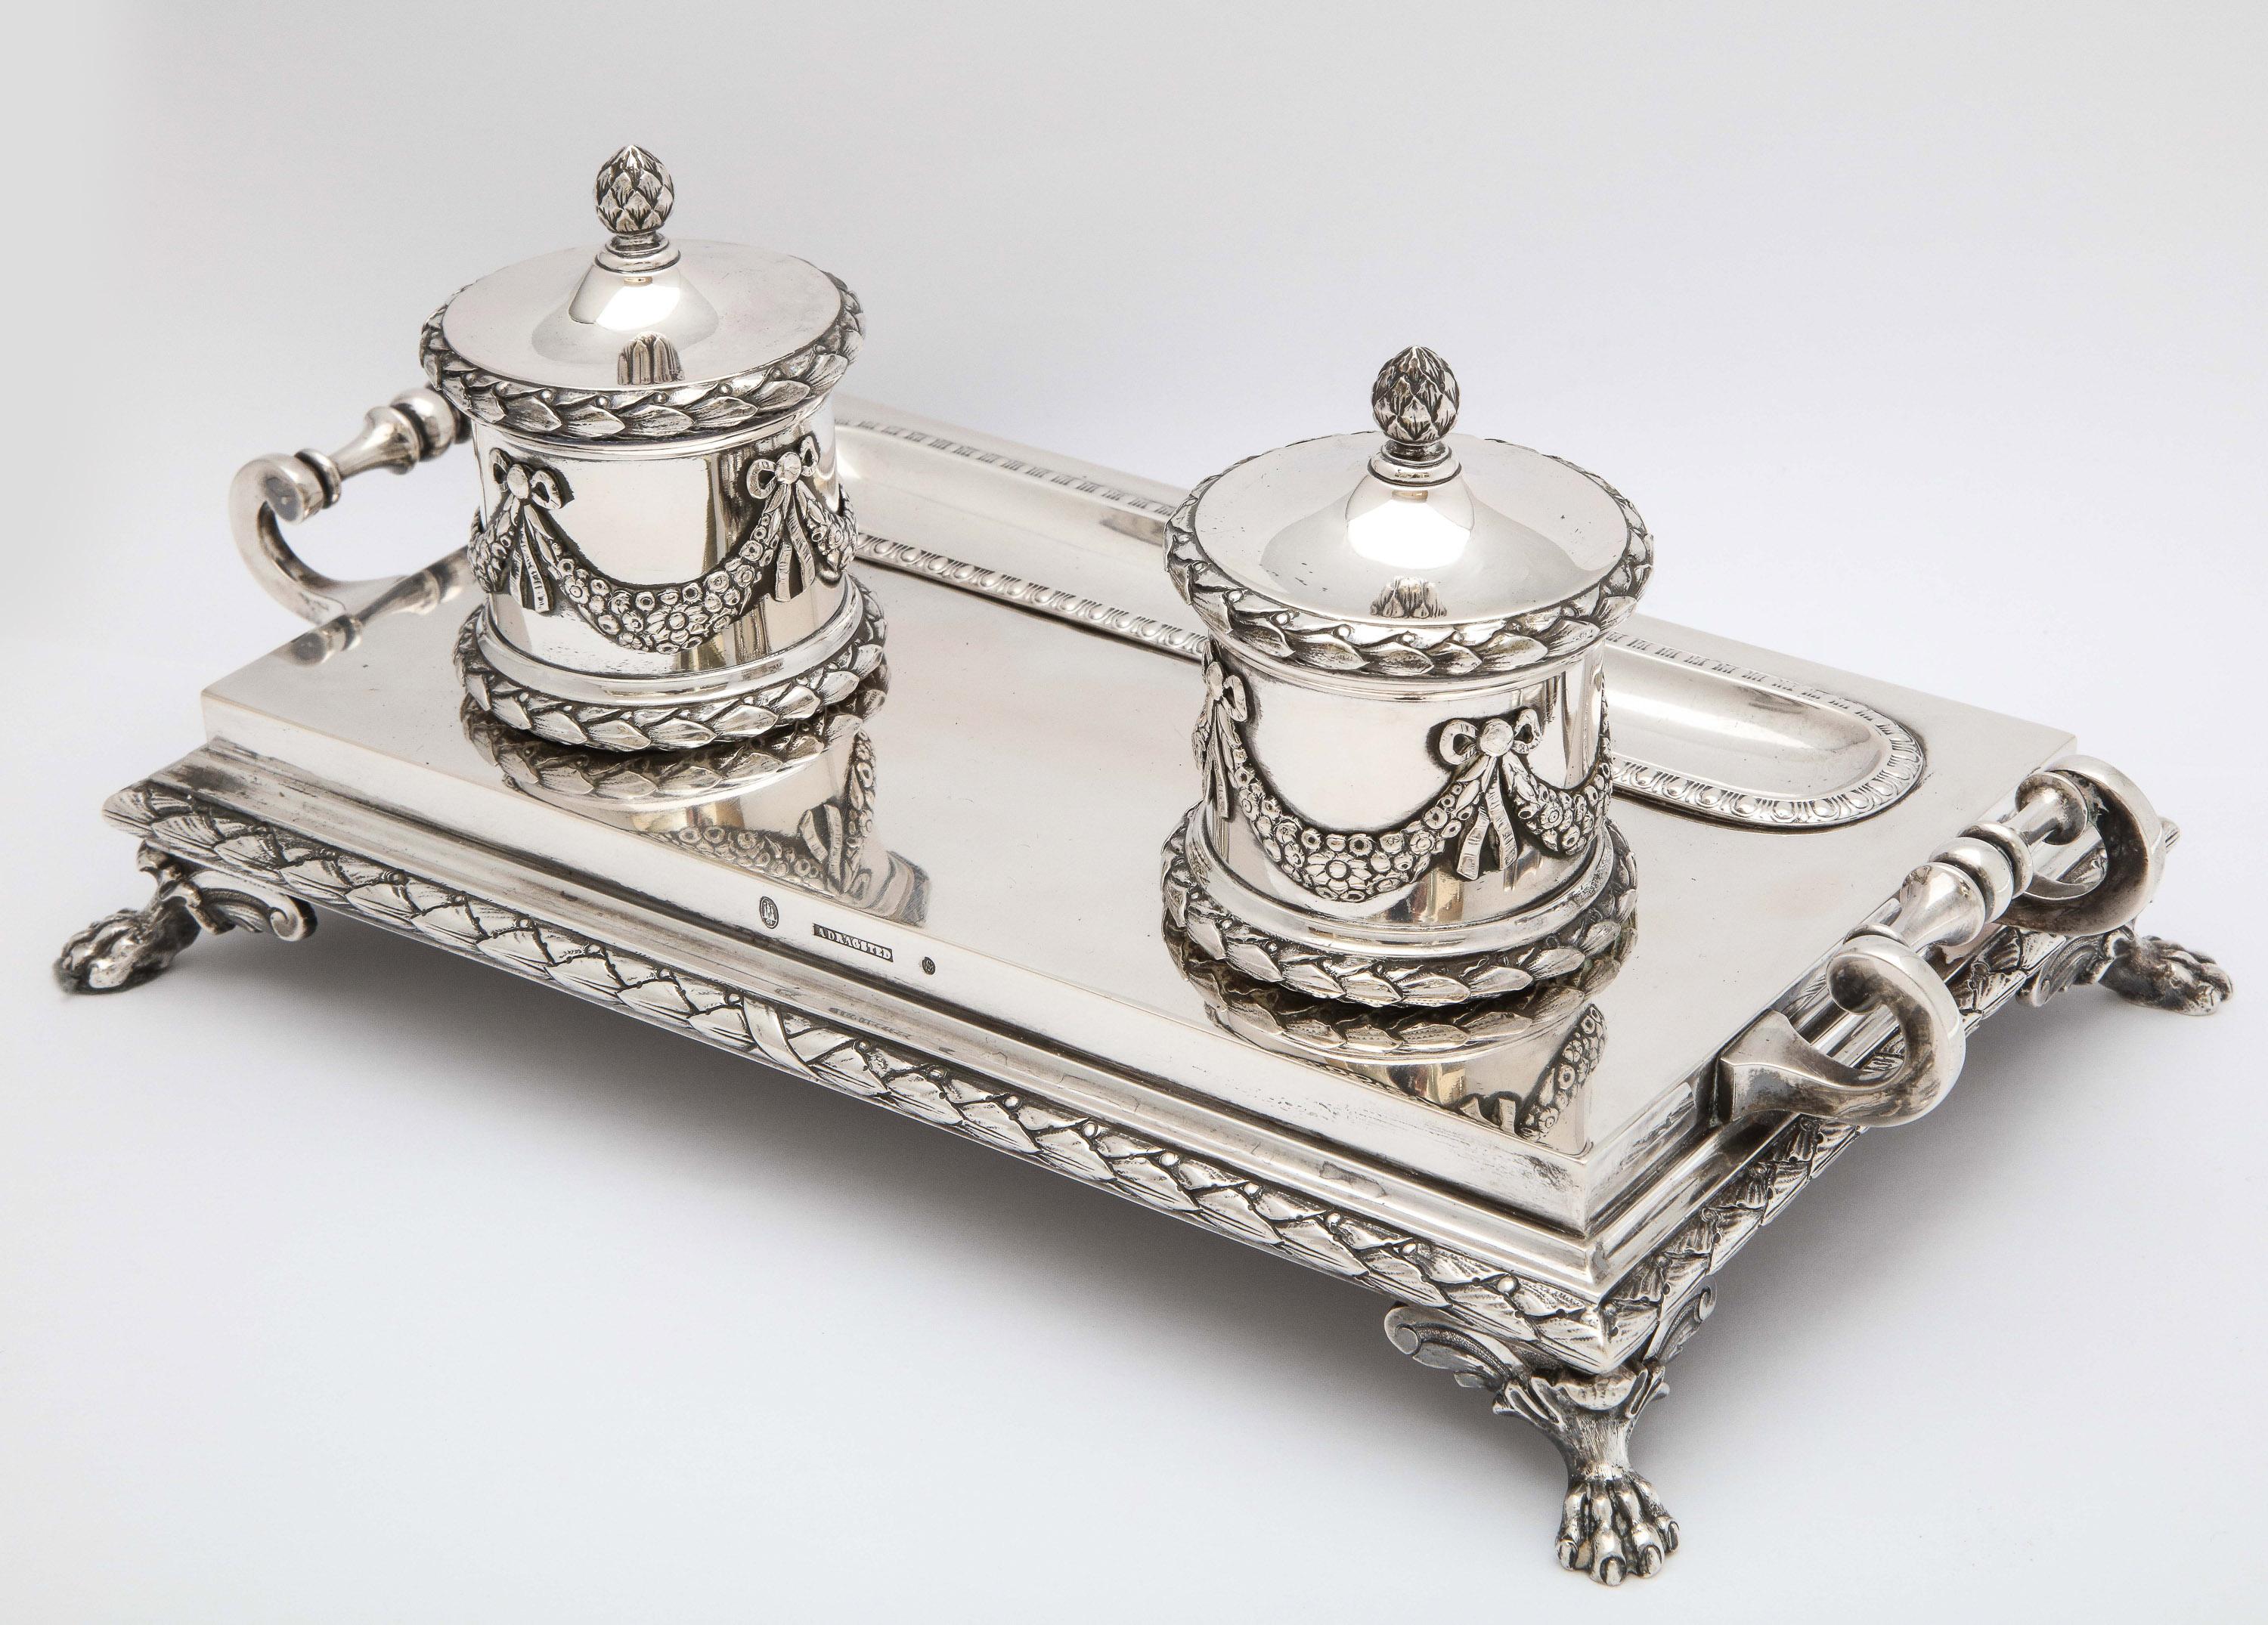 Neoclassical-Style Continental Silver '.800' Footed Double Inkstand by Dragstead For Sale 9